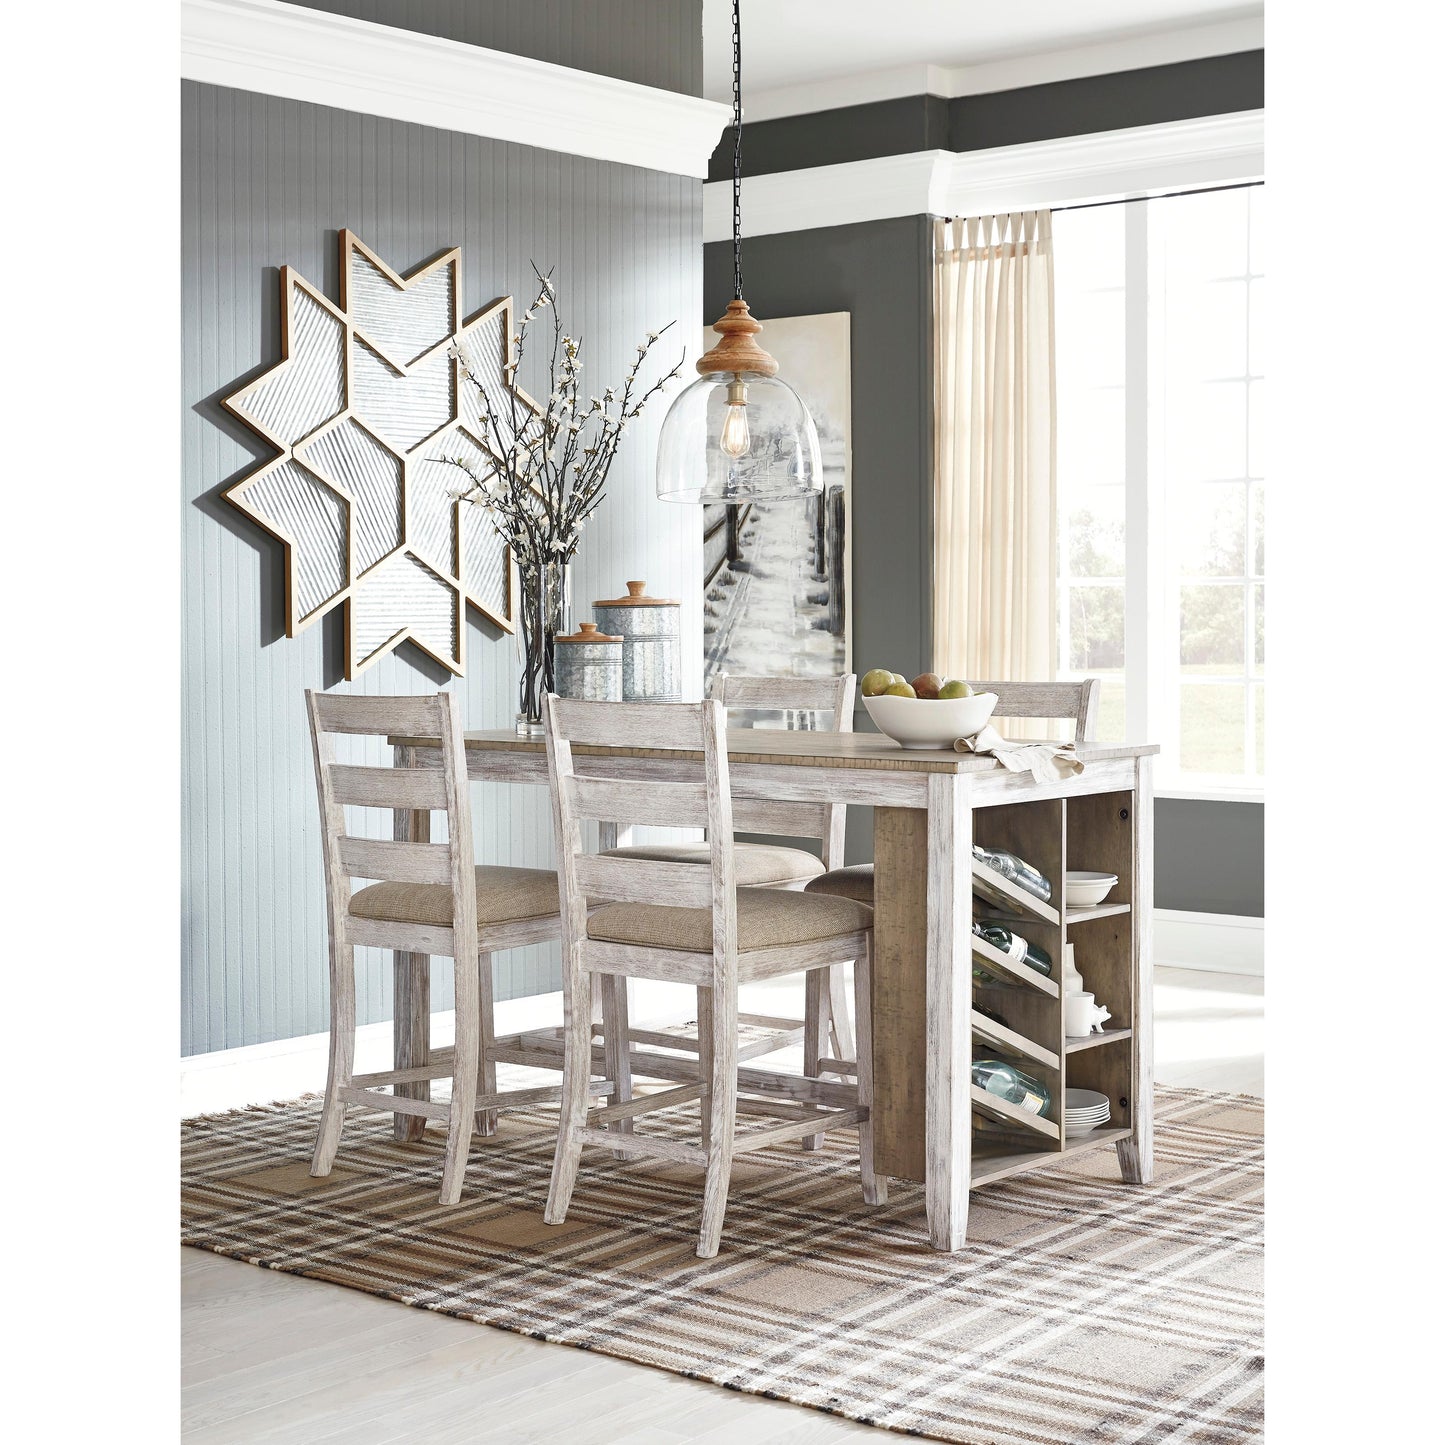 Signature Design by Ashley Skempton Counter Height Dining Table with Trestle Base D394-32